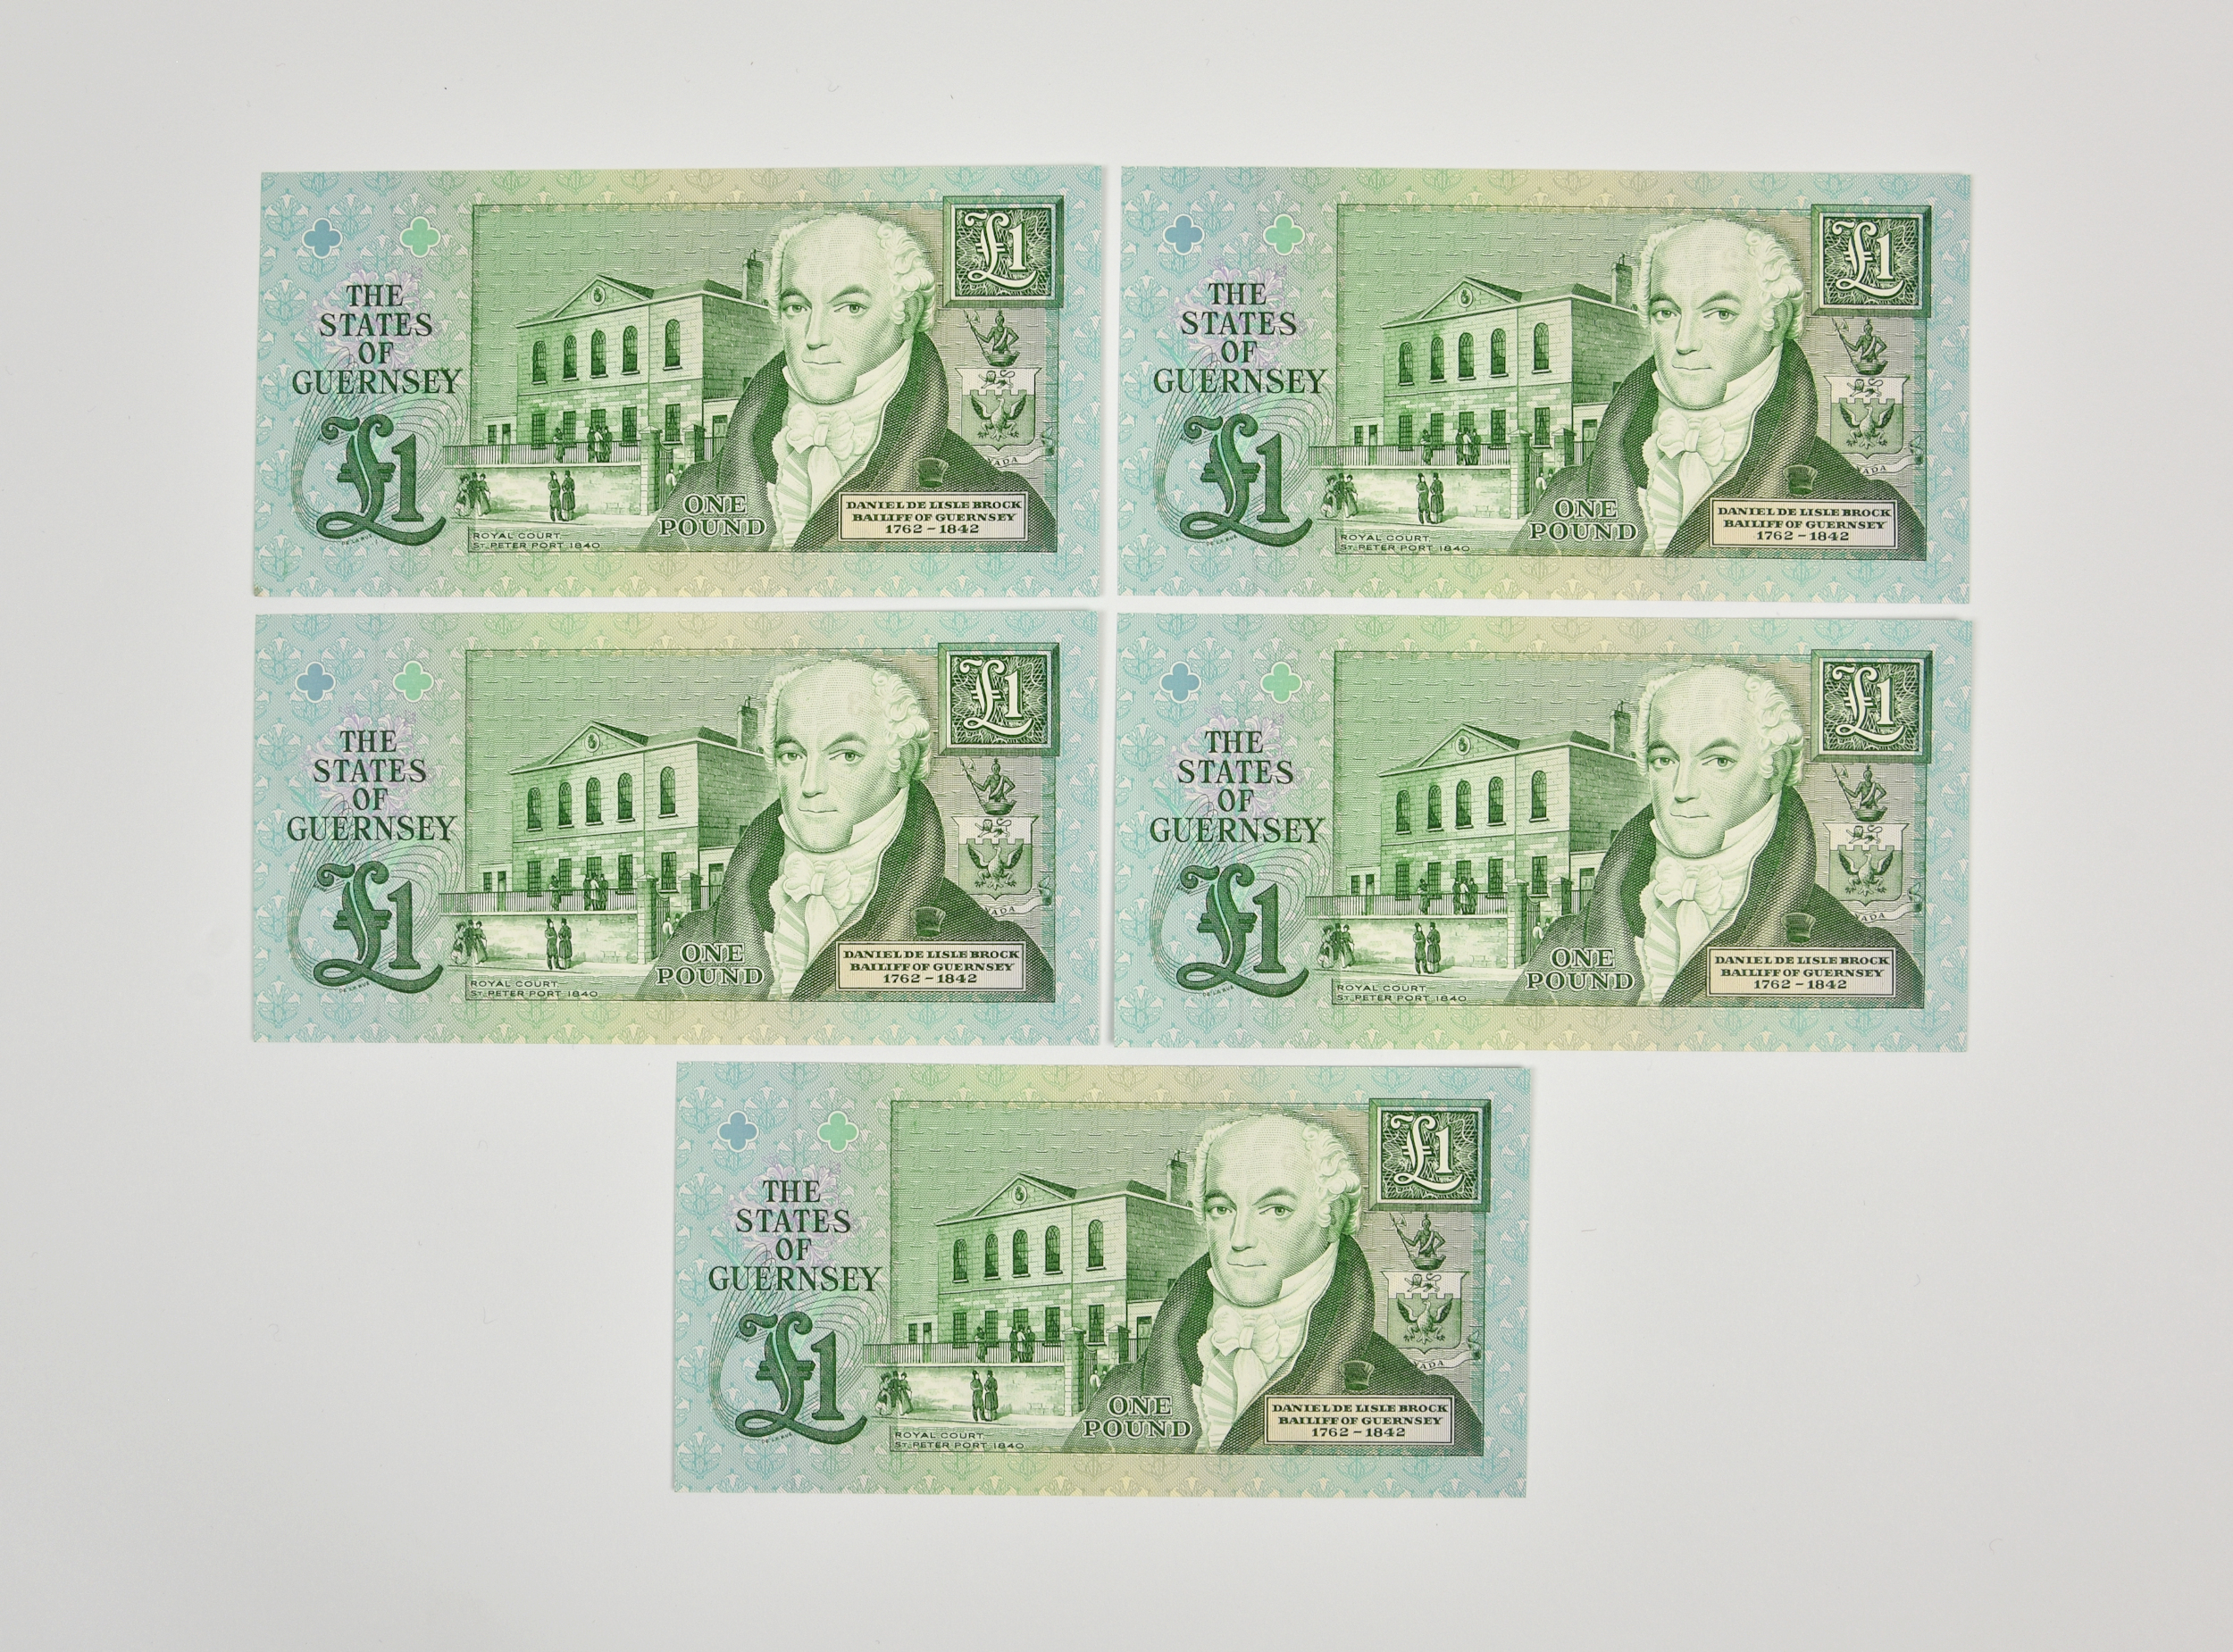 BRITISH BANKNOTES - The States of Guernsey - Z replacement One Pound consecutive five, c. 1991, - Image 2 of 2